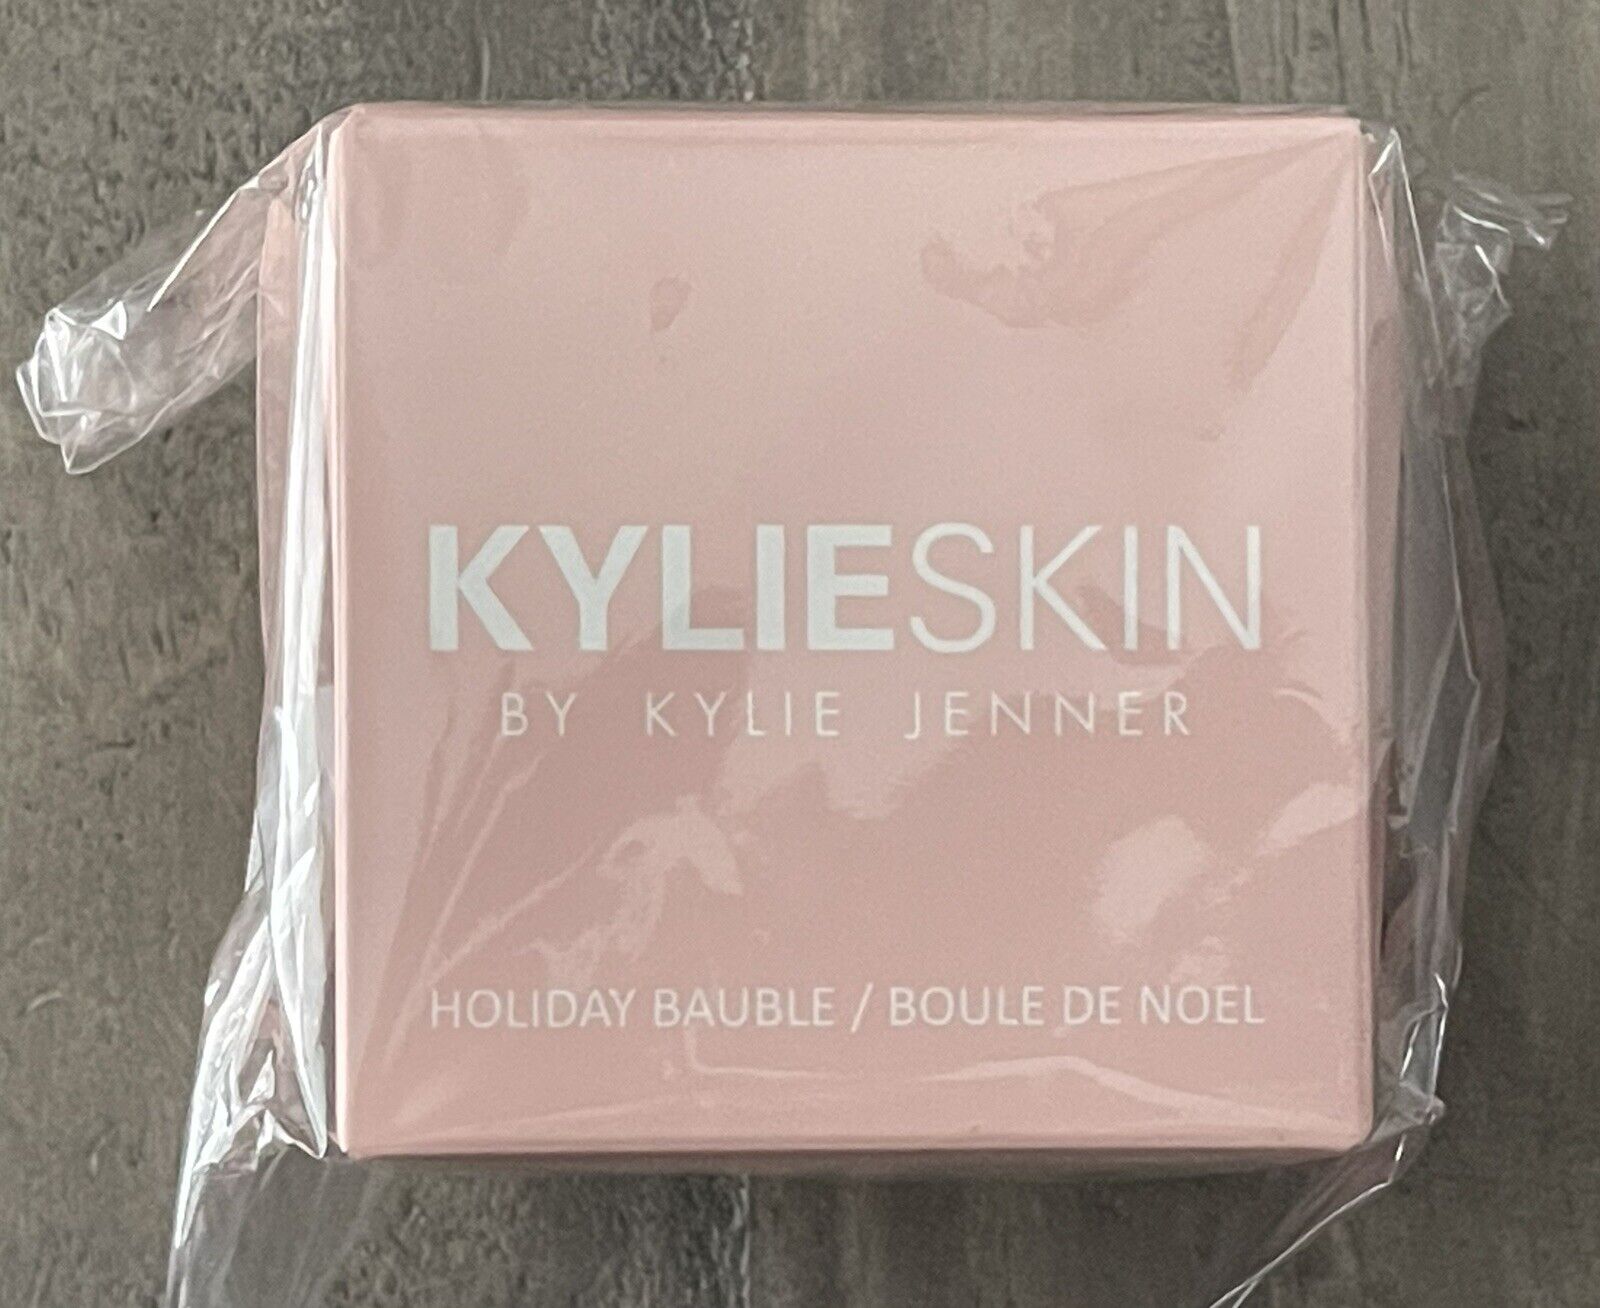 Kylieskin by Kylie Jenner Holiday Bauble/Ornament - Brand New Sealed